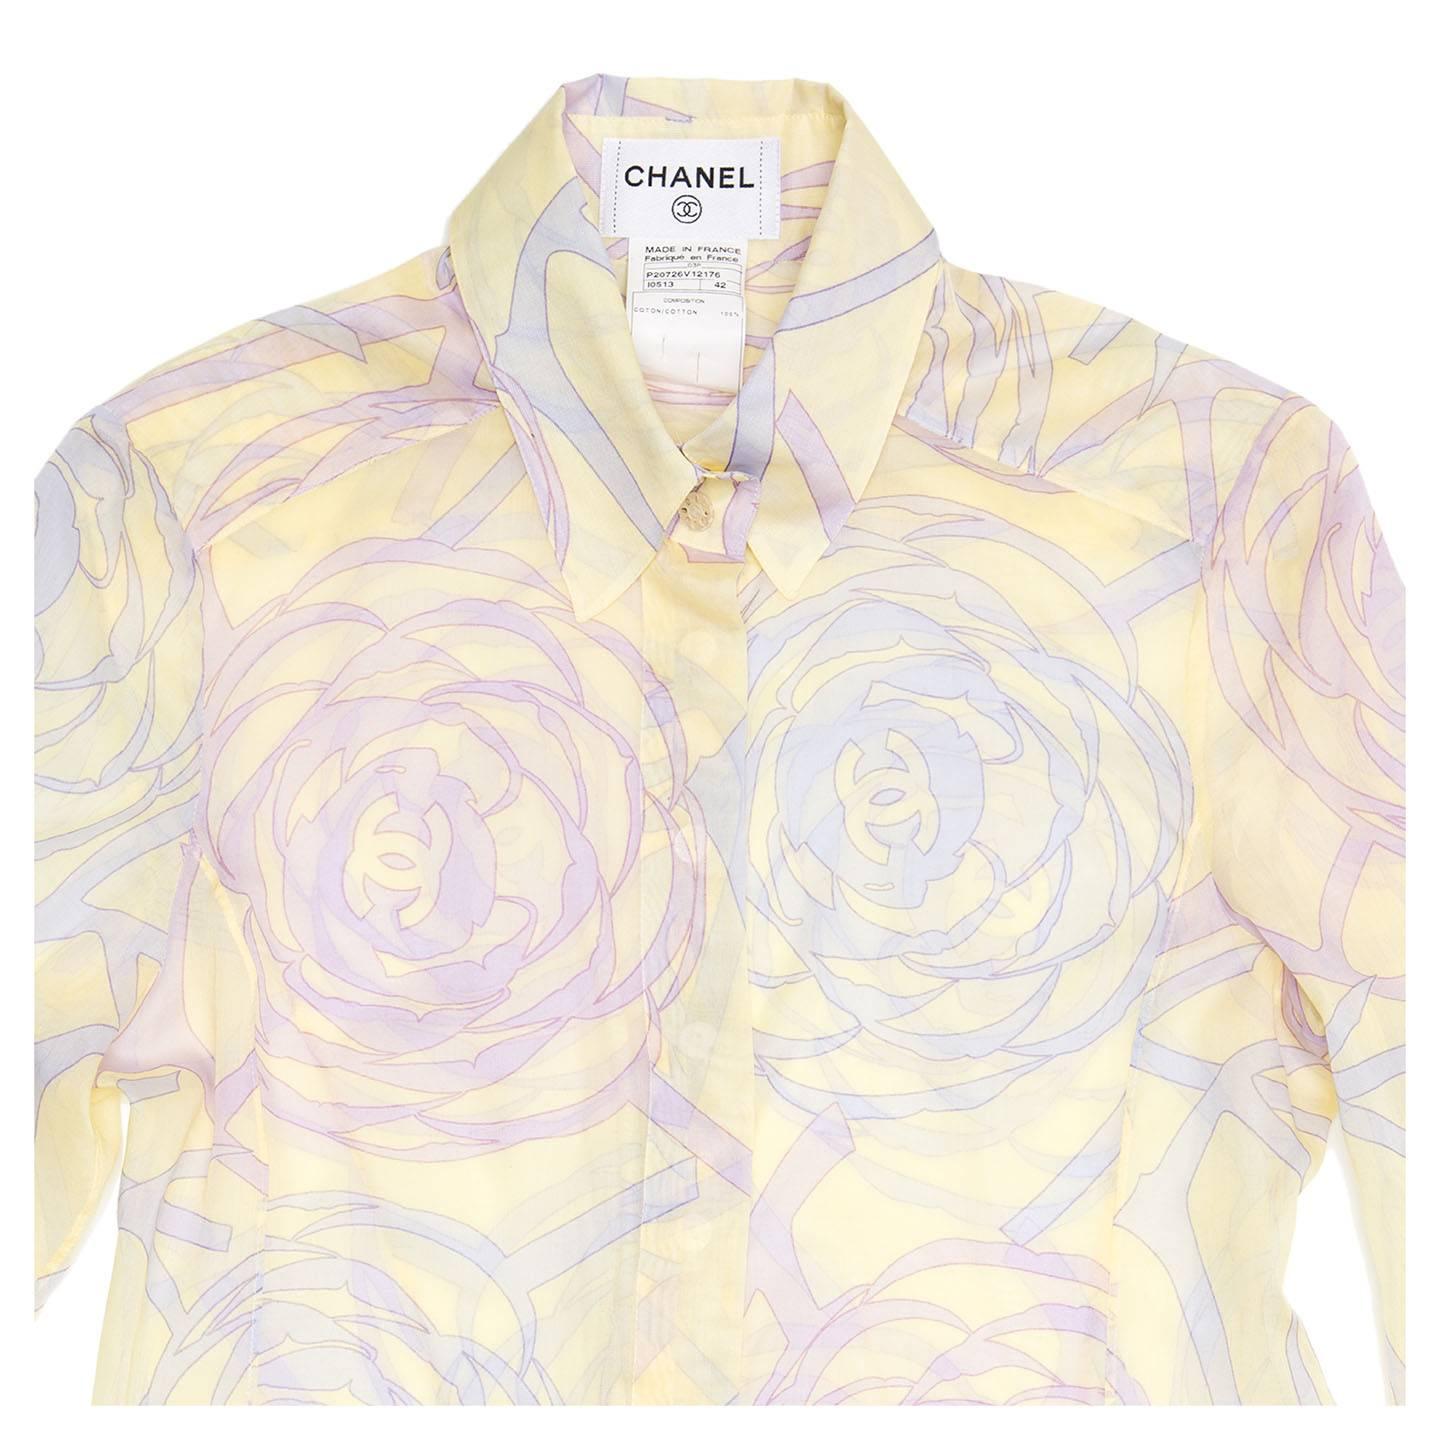 Chanel Multicolor Sheer Cotton Shirt In Excellent Condition For Sale In Brooklyn, NY